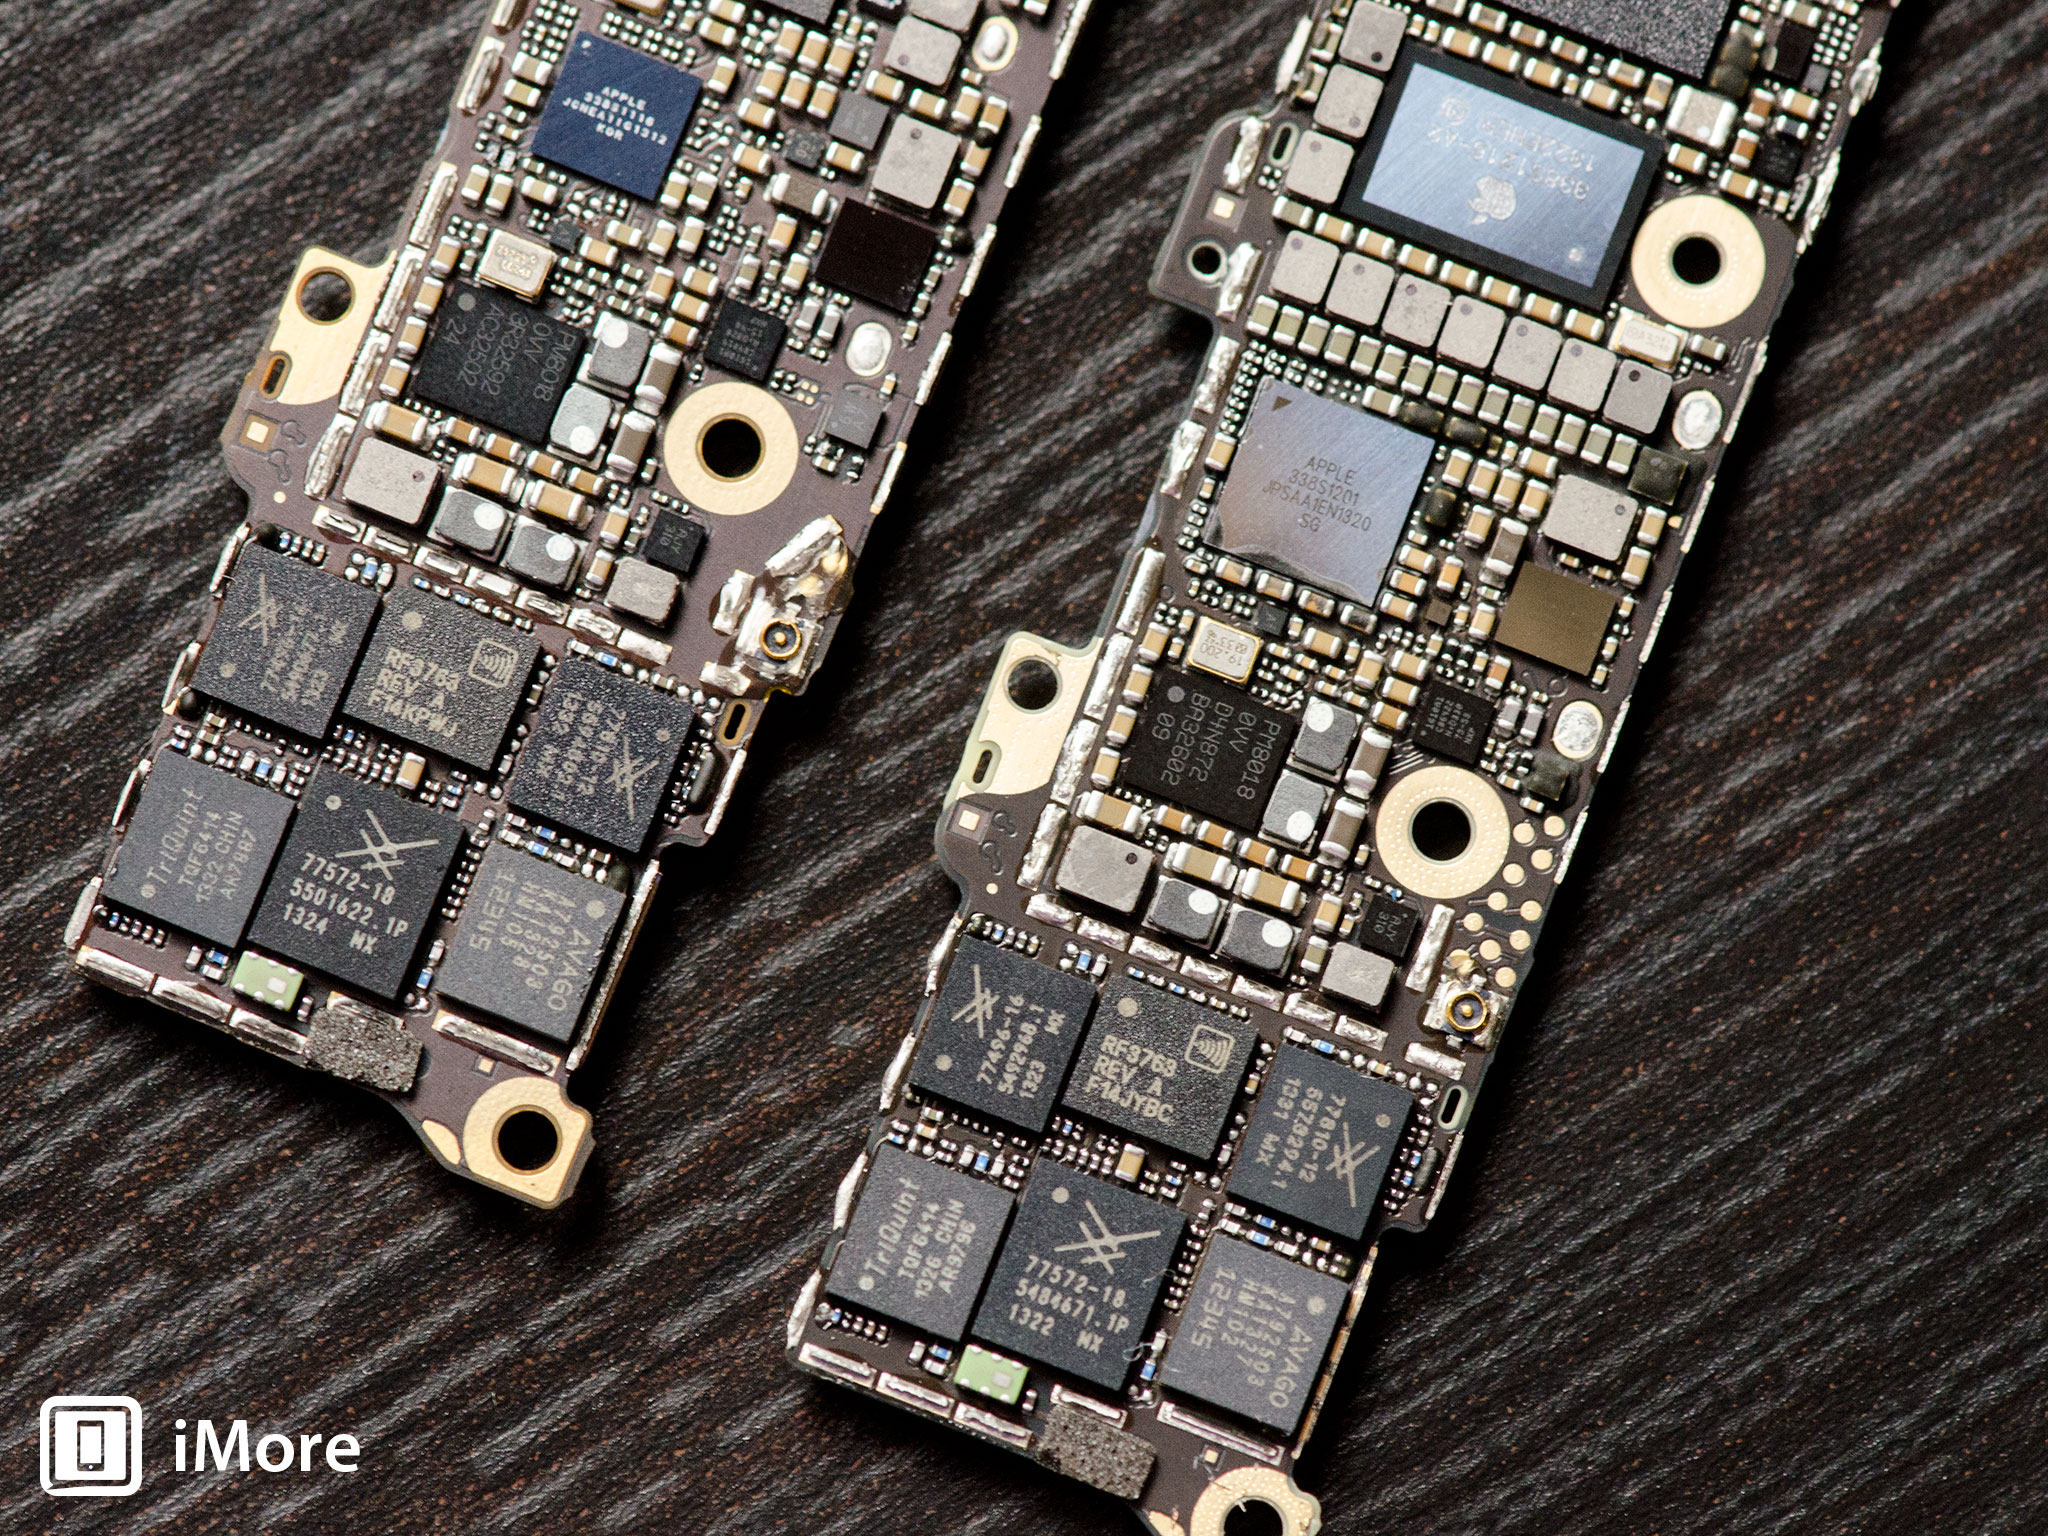 And just for fun.. iPhone 5s vs iPhone 5c comparison photos!